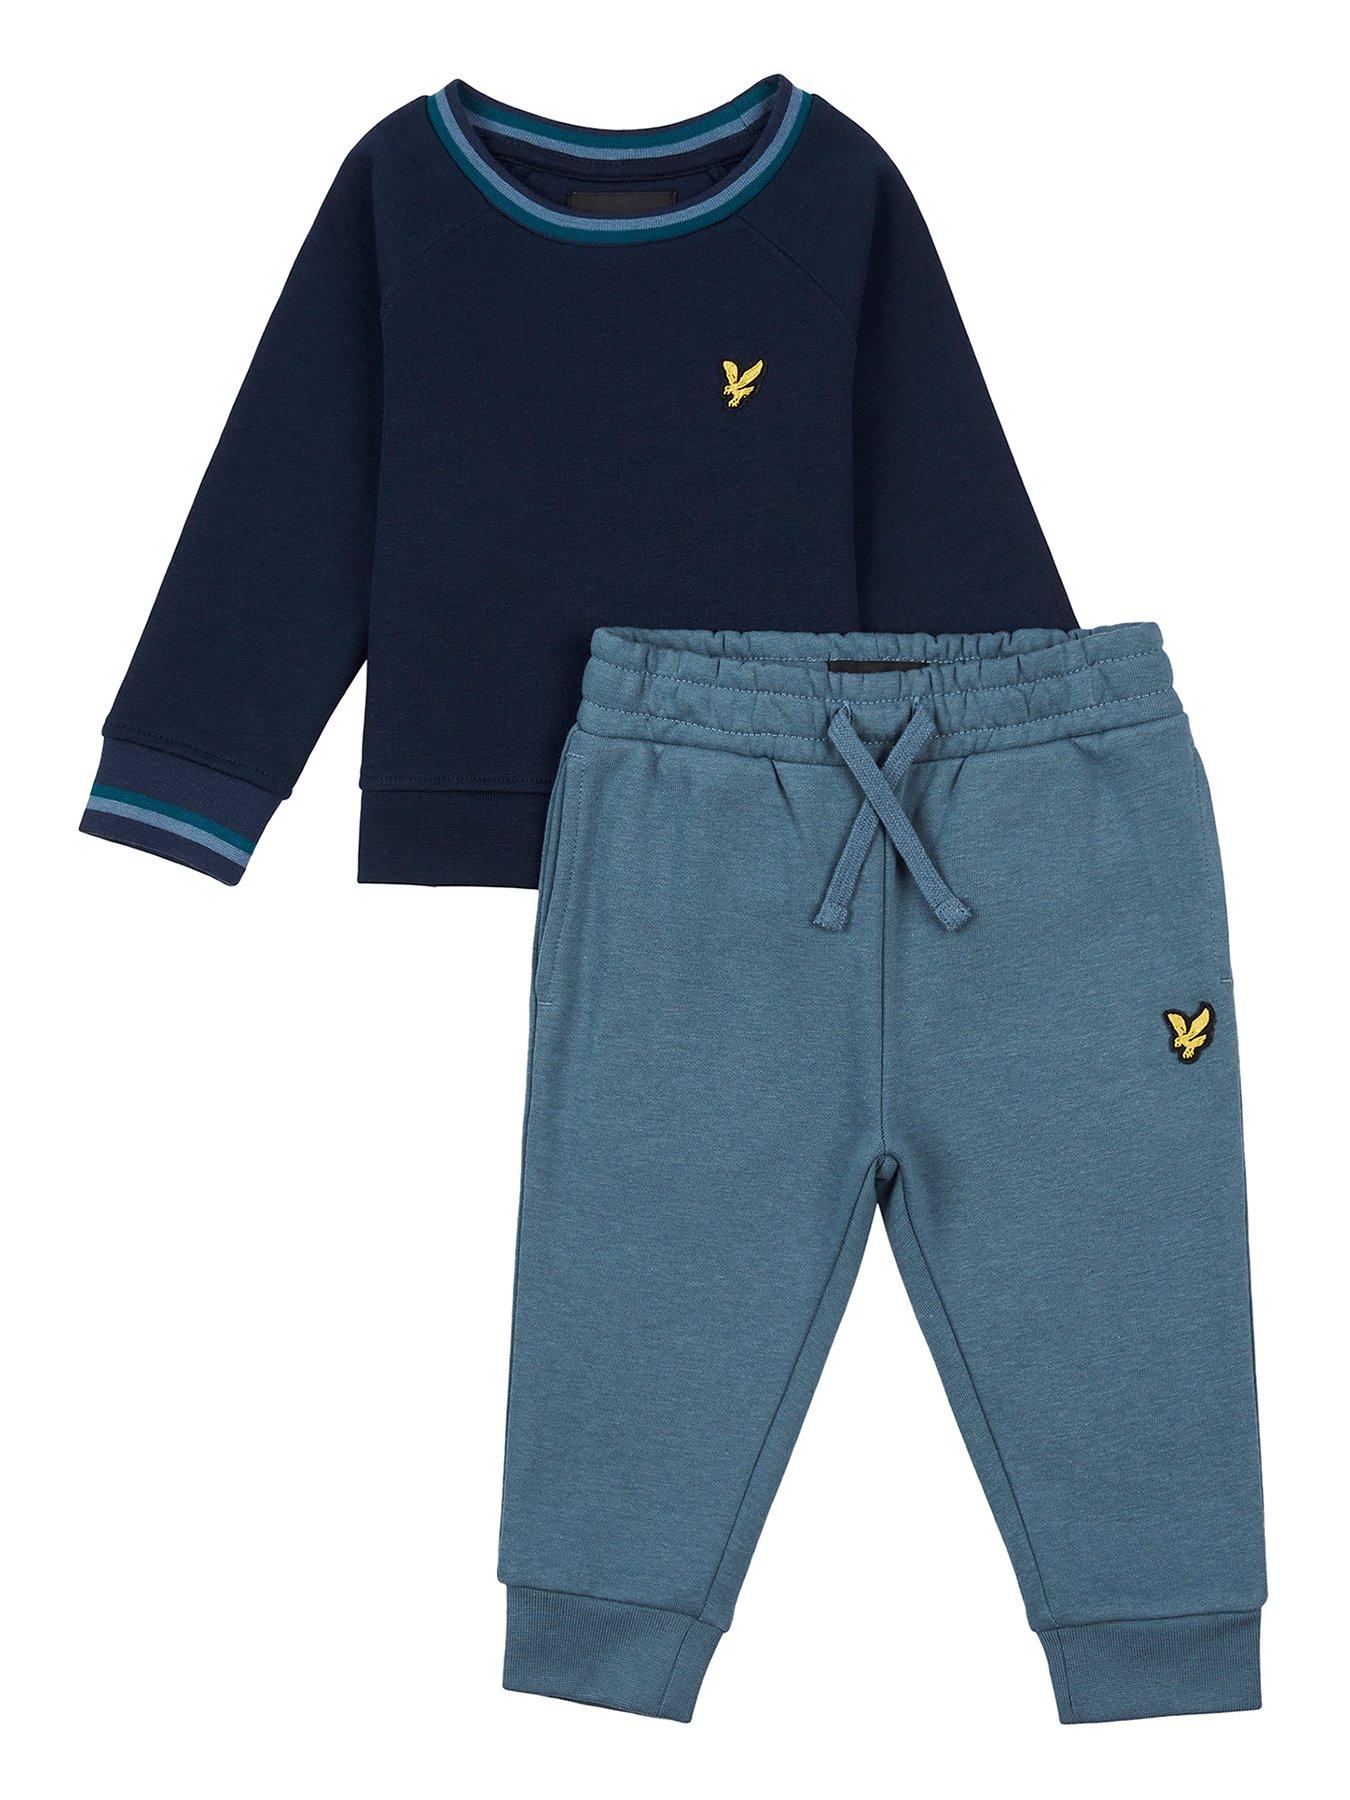 Baby Clothes Toddler Boys Tipped Crew And Jog Set - Navy